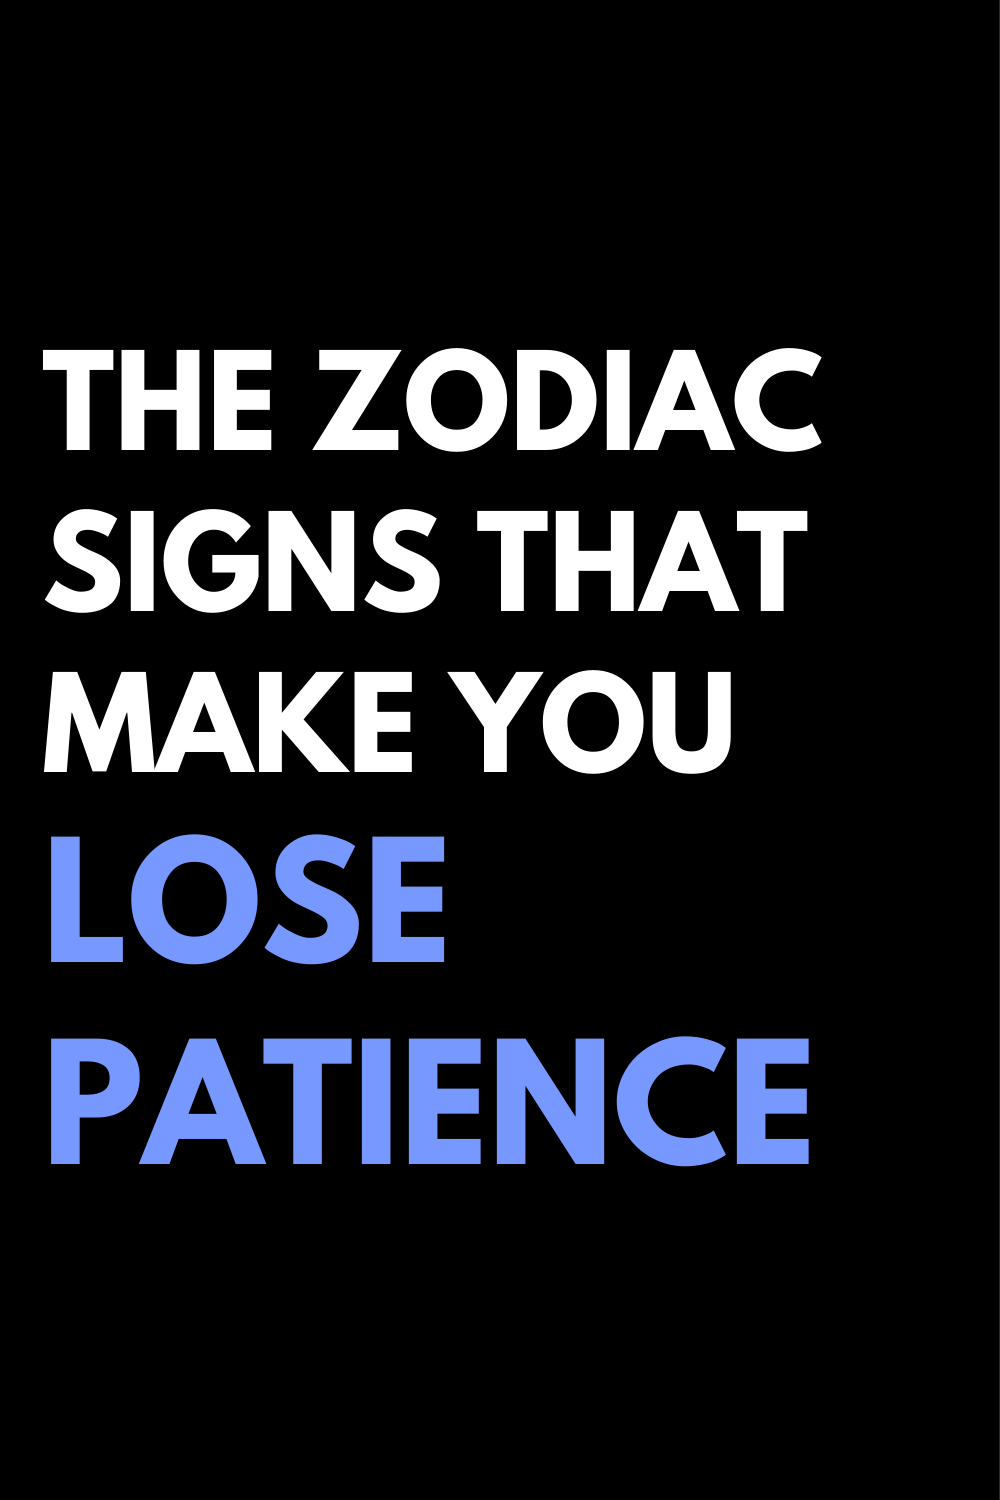 The zodiac signs that make you lose patience